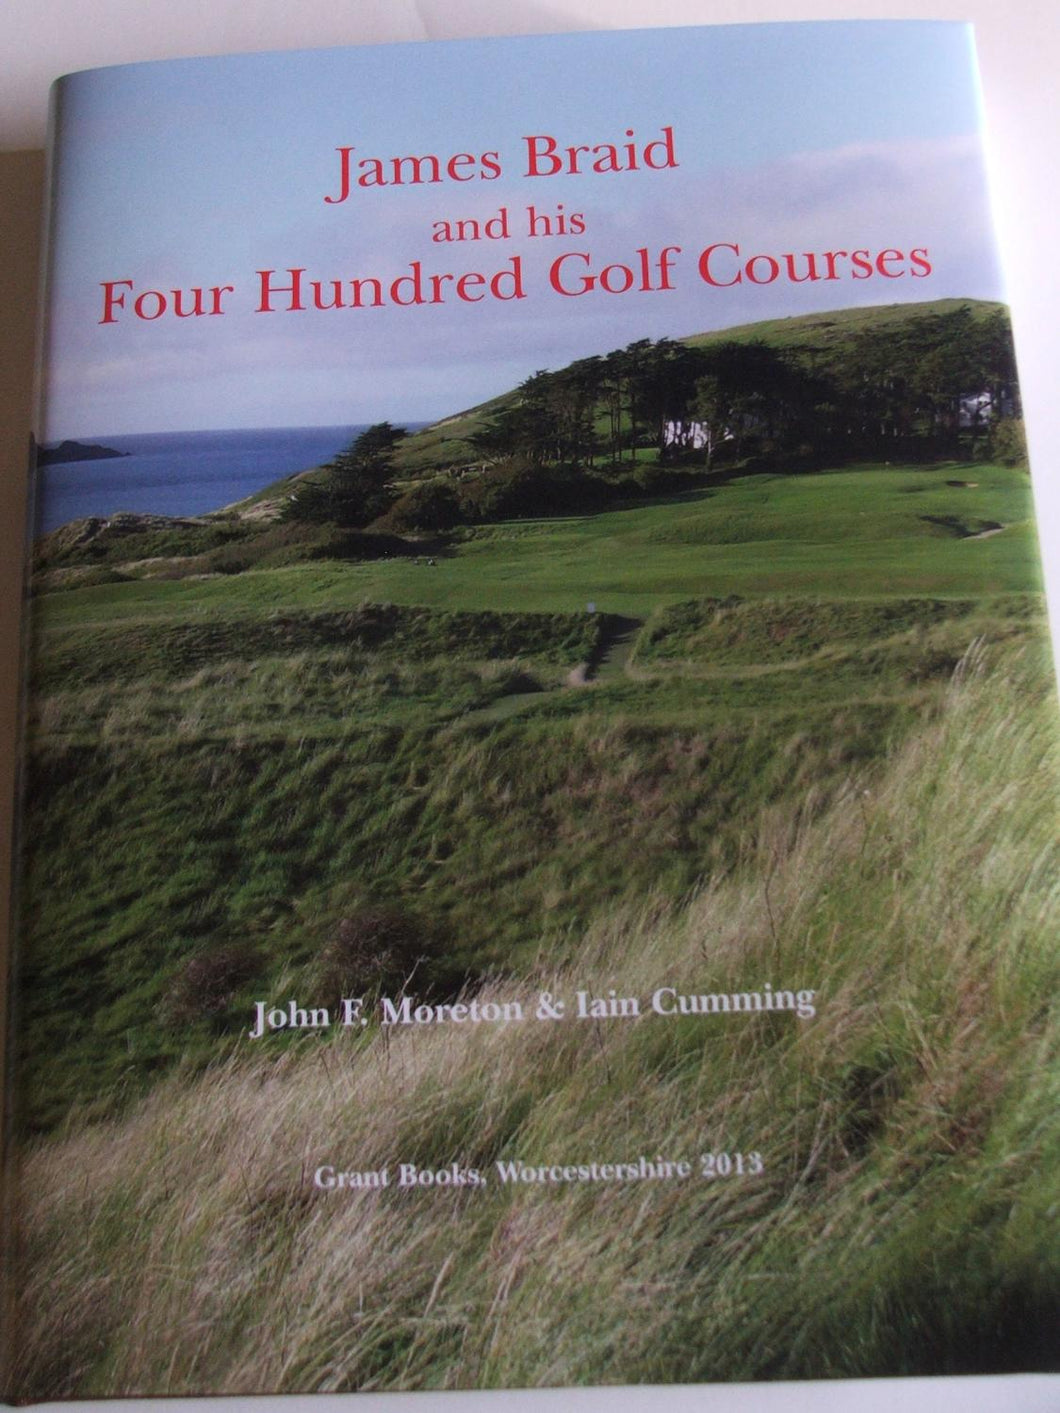 James Braid and His Four Hundred Golf Courses